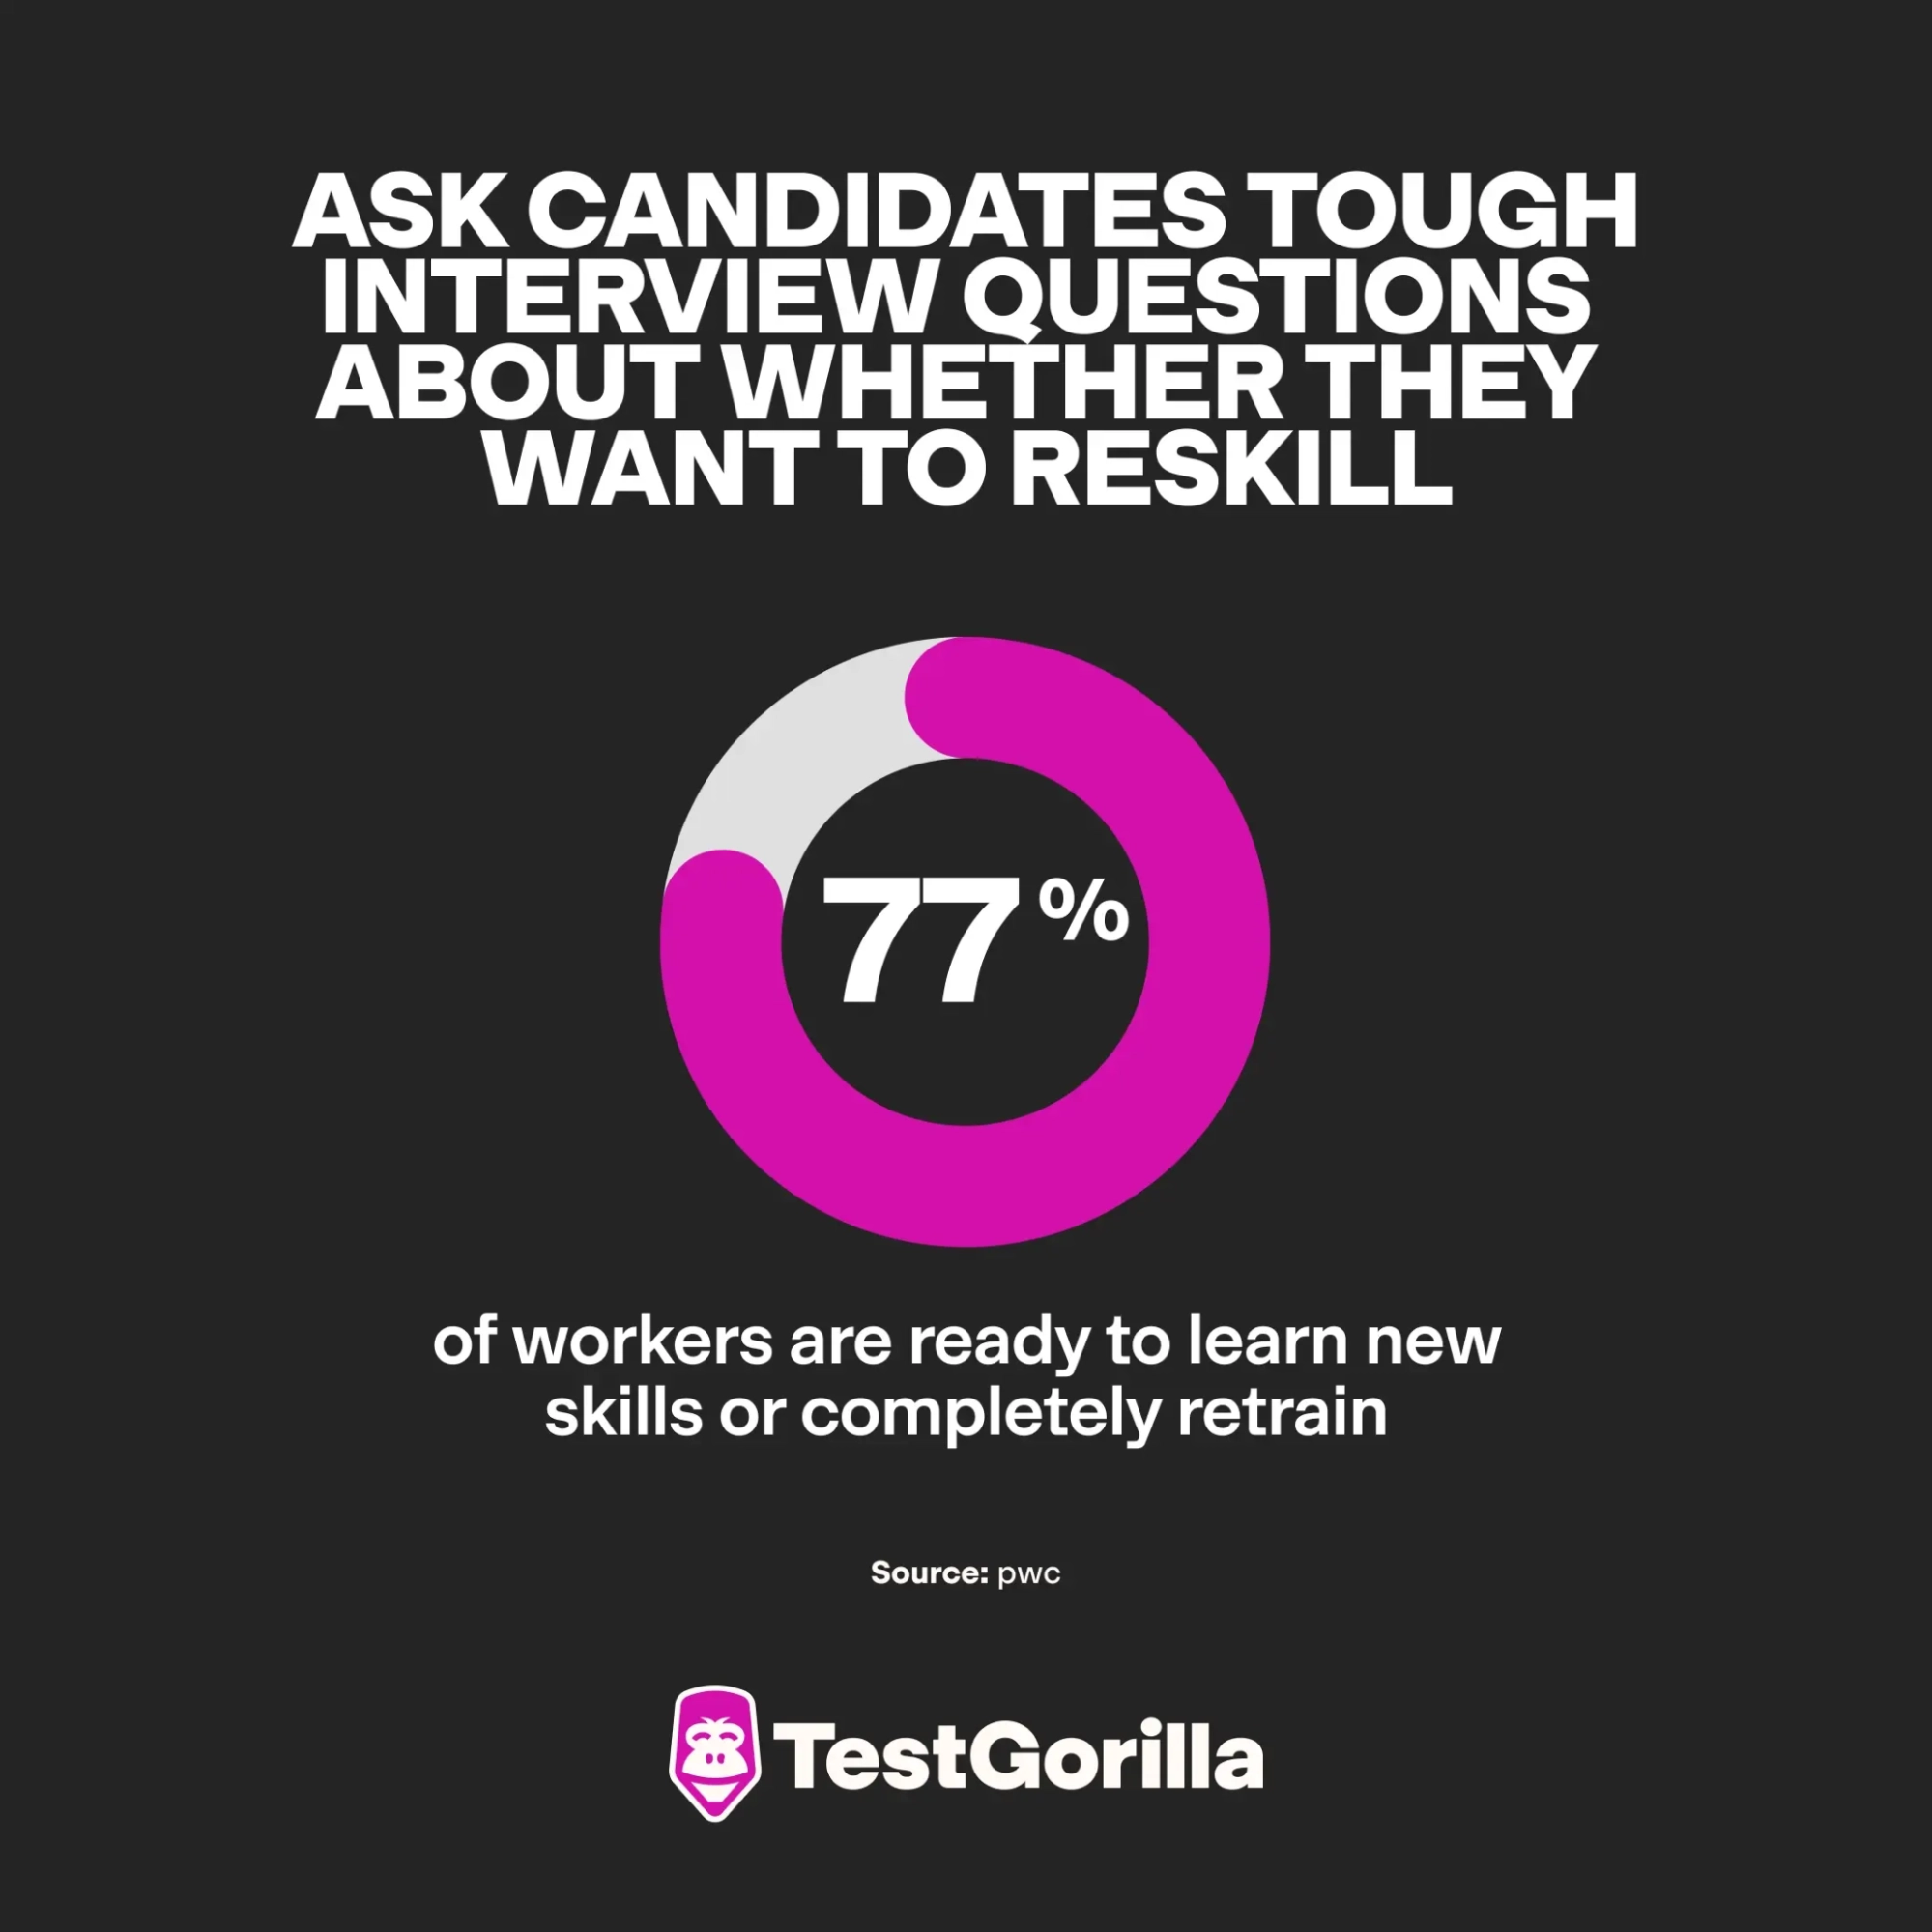 Ask candidates tough interview questions about whether they want to reskill